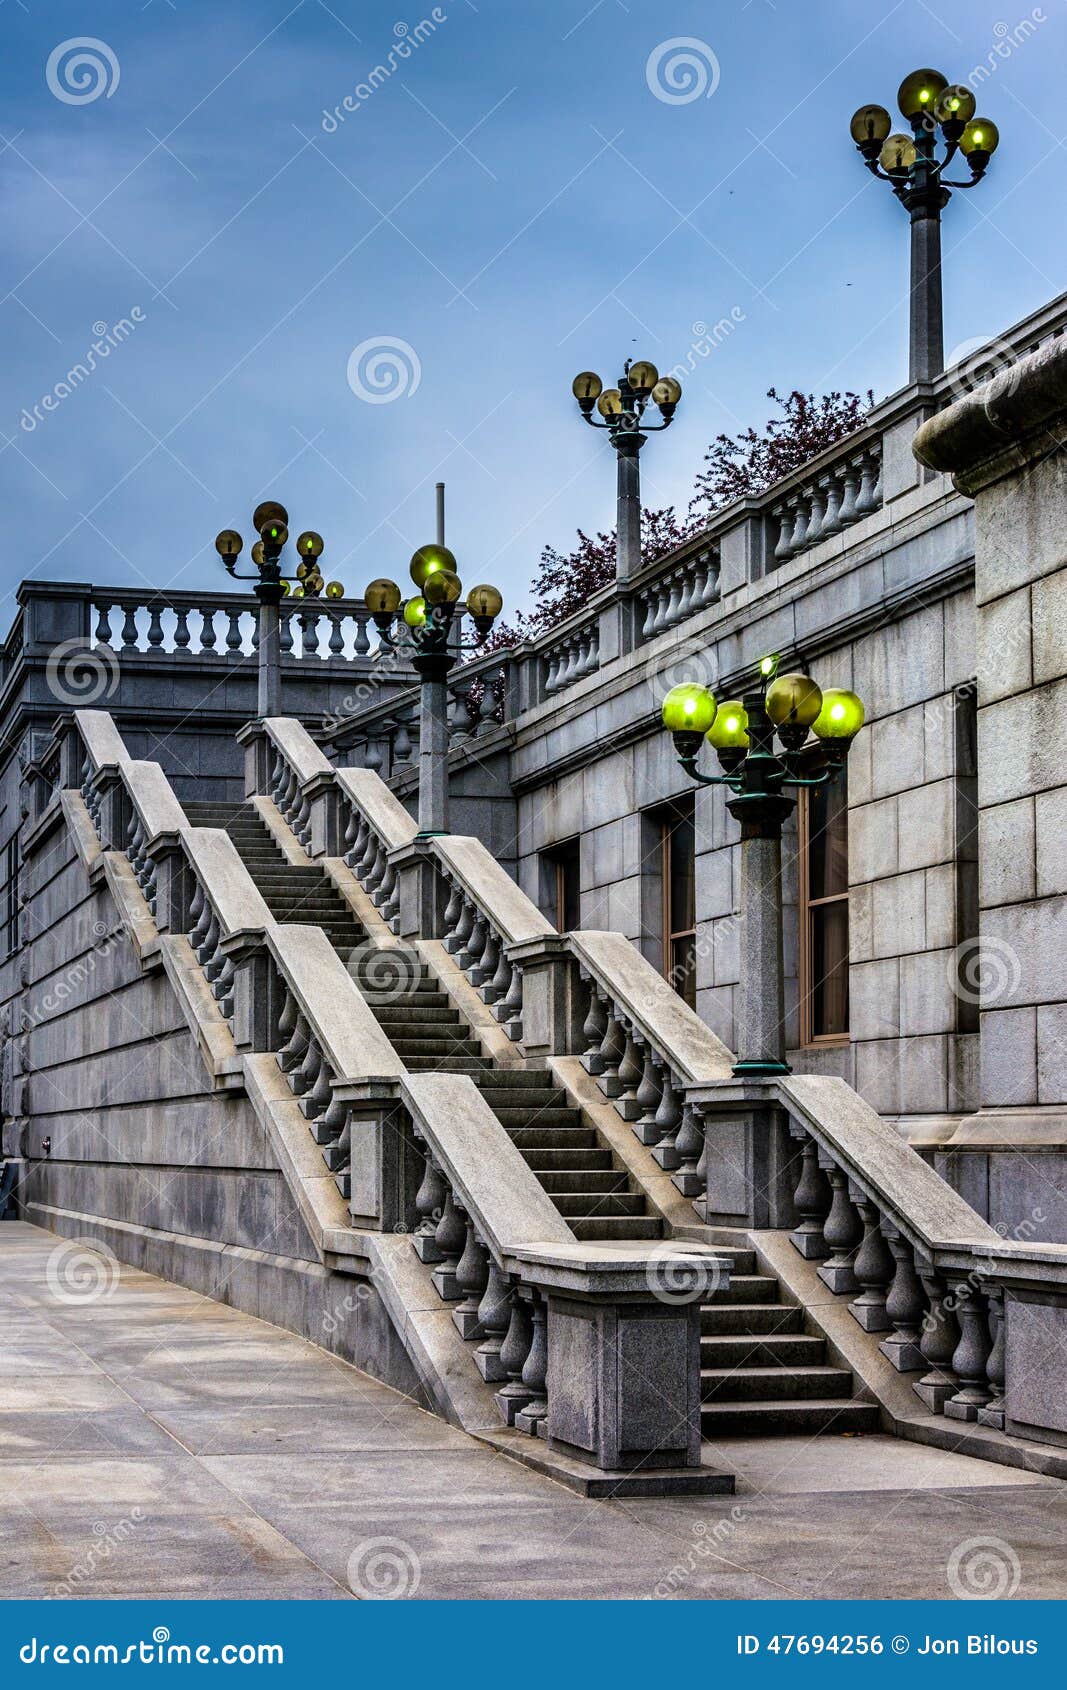 staircase at the capitol complex in harrisburg, pennsylvania.